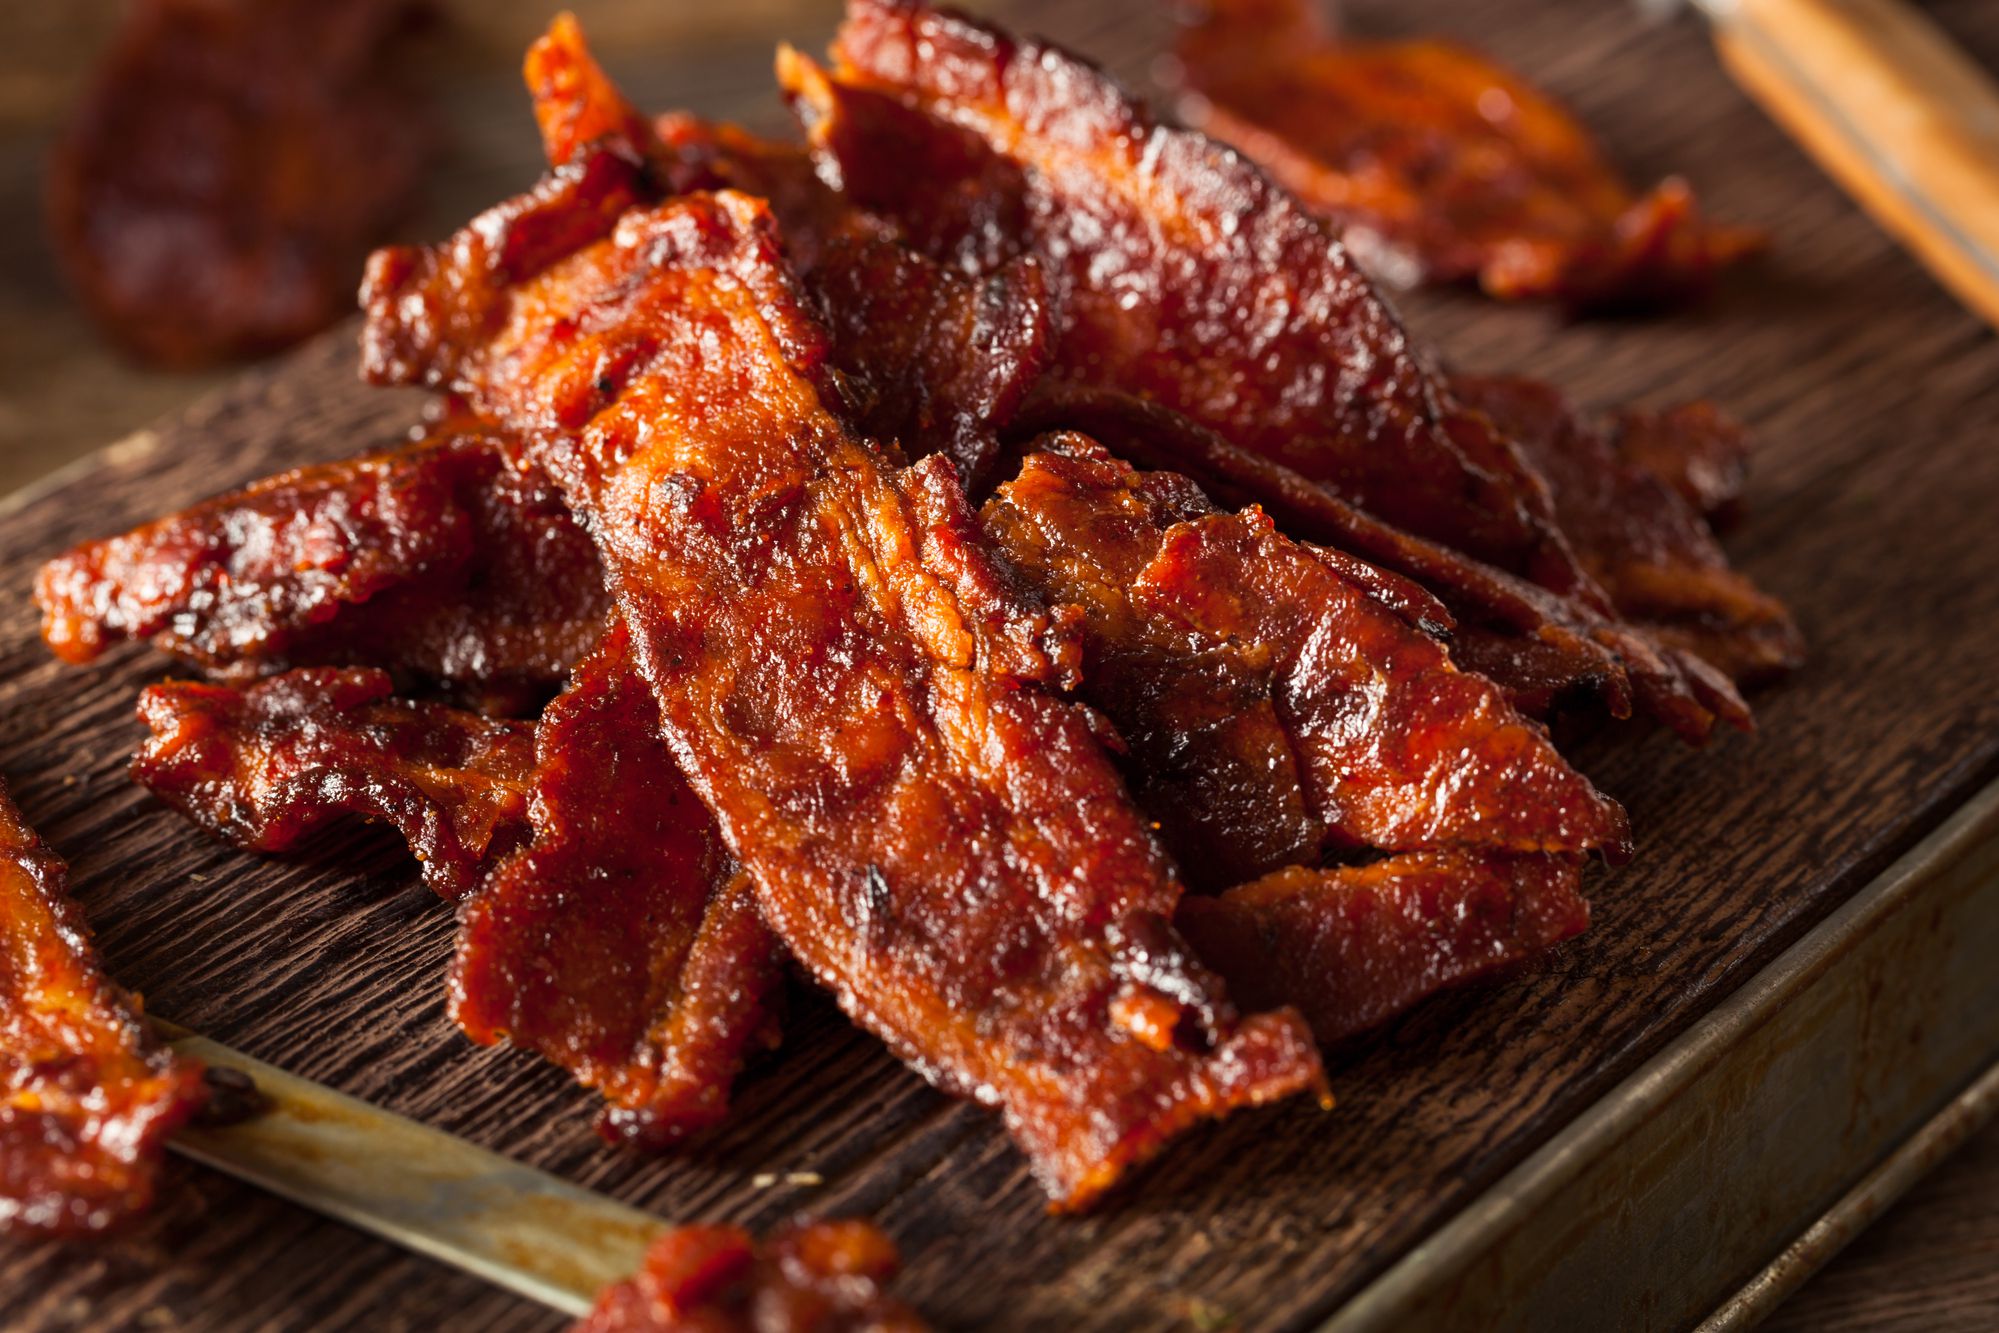 <p>Bacon, America's favorite breakfast protein, has gone up quite a bit in price since the 1900s when one dollar could buy eight pounds. Today one pound of store-bought bacon is $7.24. Don't even get us started on the "fancy" bacon that is waaaay more expensive.</p><p><b>Related: <a href="https://www.msn.com/en-us/foodanddrink/foodnews/this-is-the-one-bacon-to-try-in-every-state/ss-BB1fODBp">Every state's tastiest brand of bacon</a></b></p>